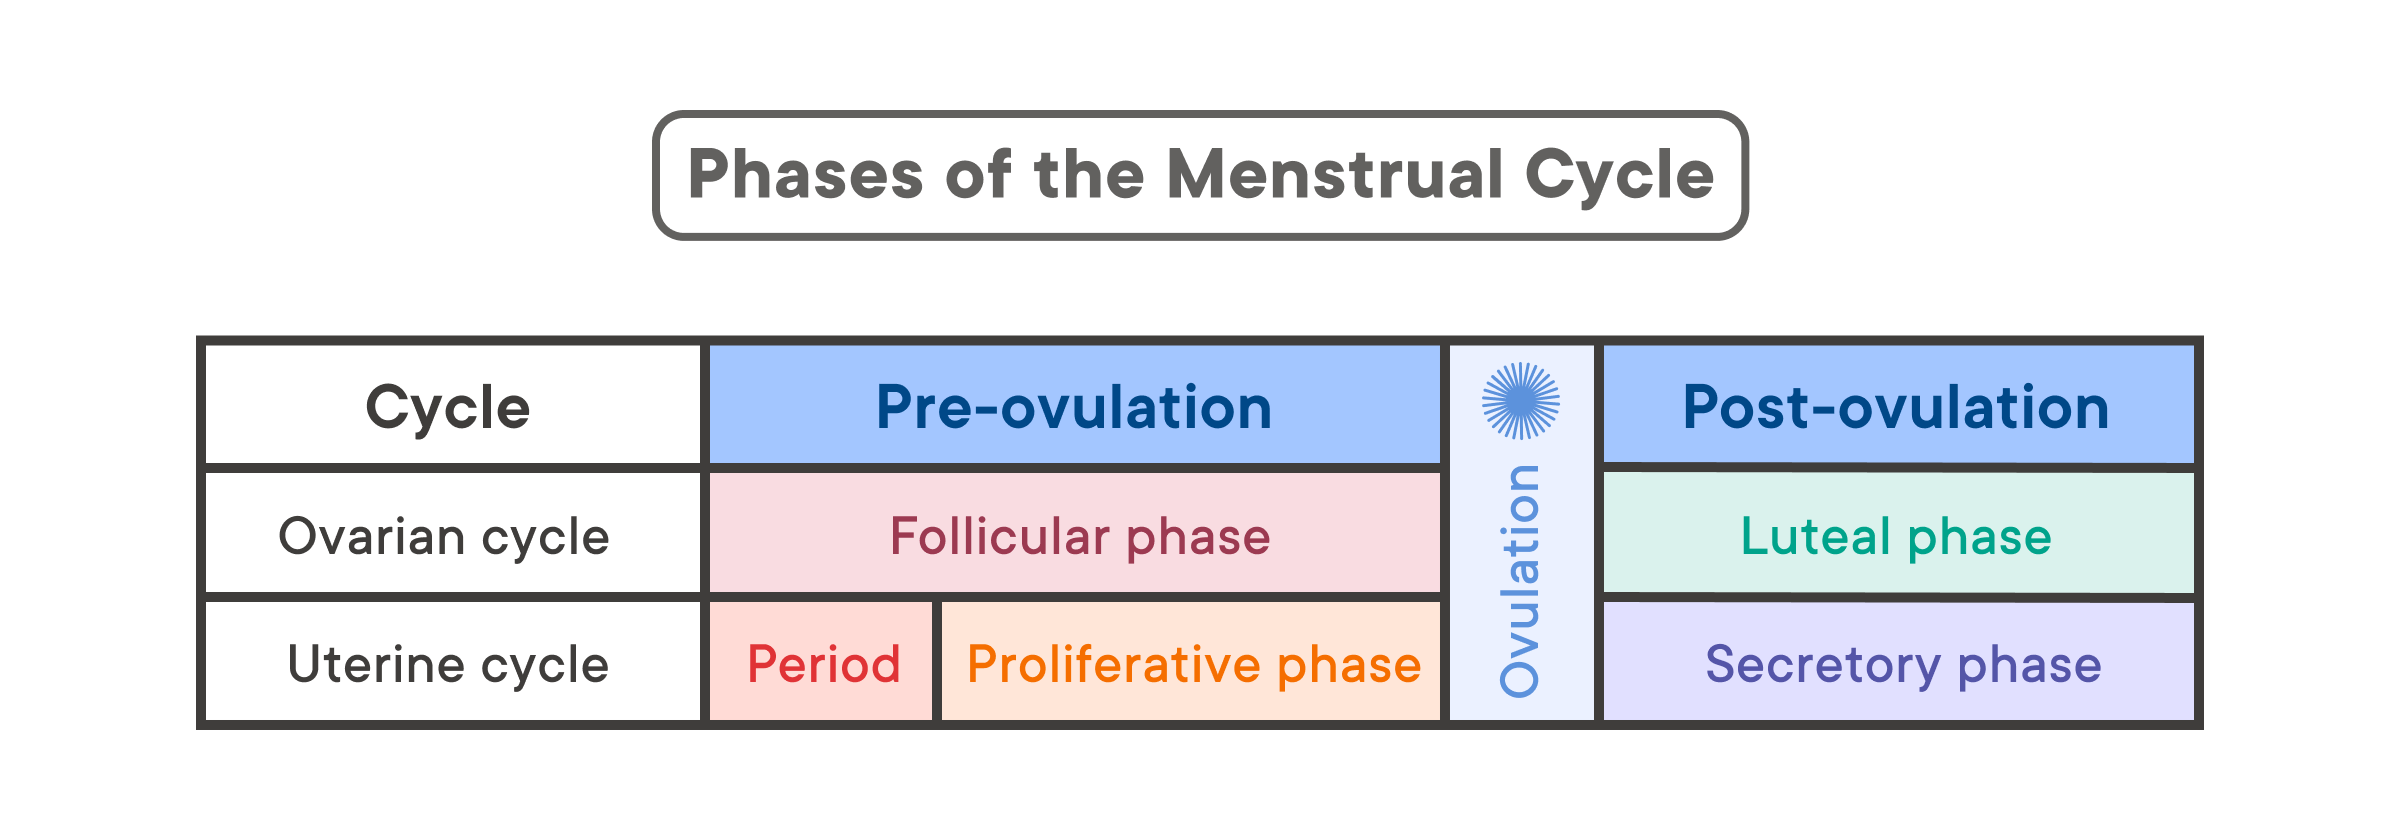 A Guide To Every Phase Of The Menstrual Cycle